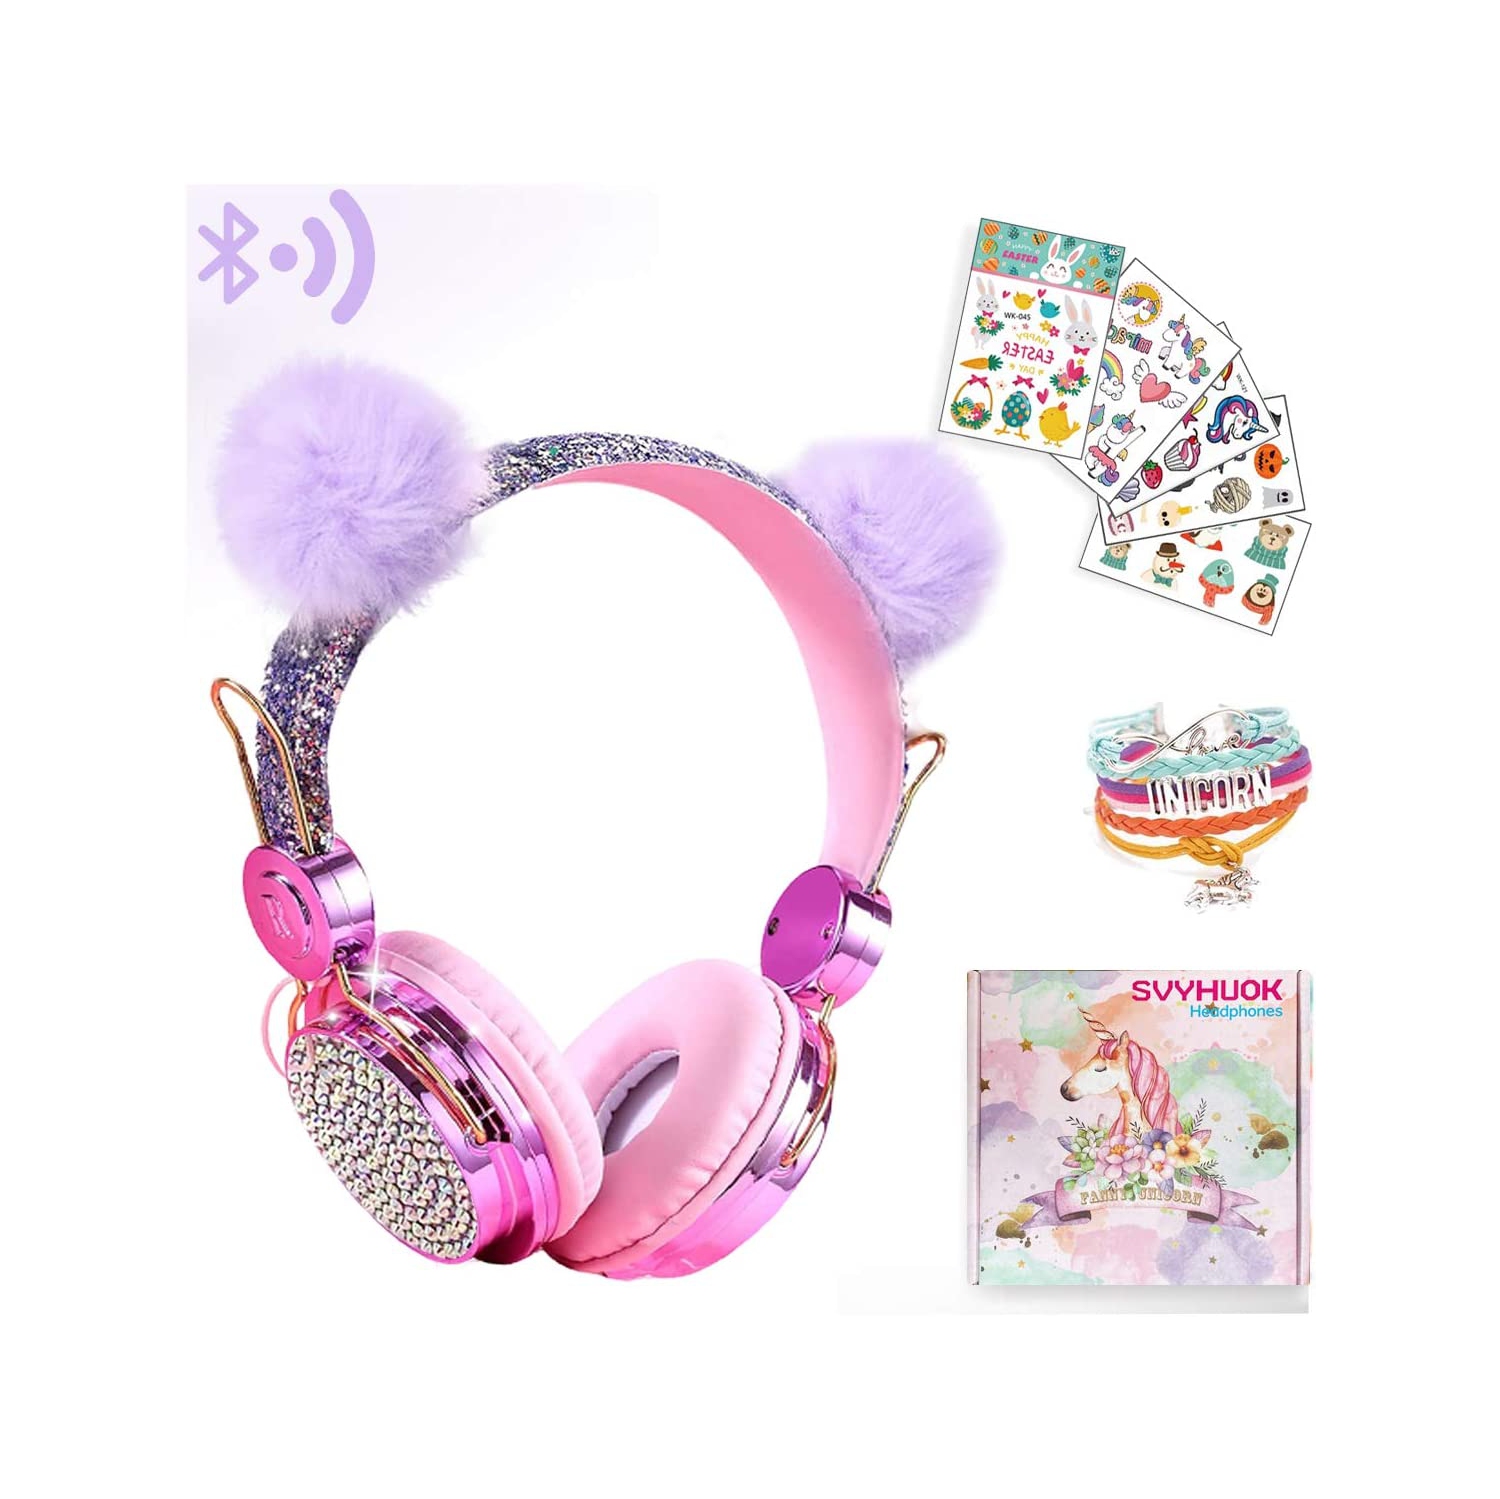 Dolaer Unicorn Kids Bluetooth Headphones for Girls,Boys Teens,Wireless Cat Headset for Smartphones/Tablet/Laptop/PC/TV,with Mic and Adjustable Headband,Surprise Box is The for Birt